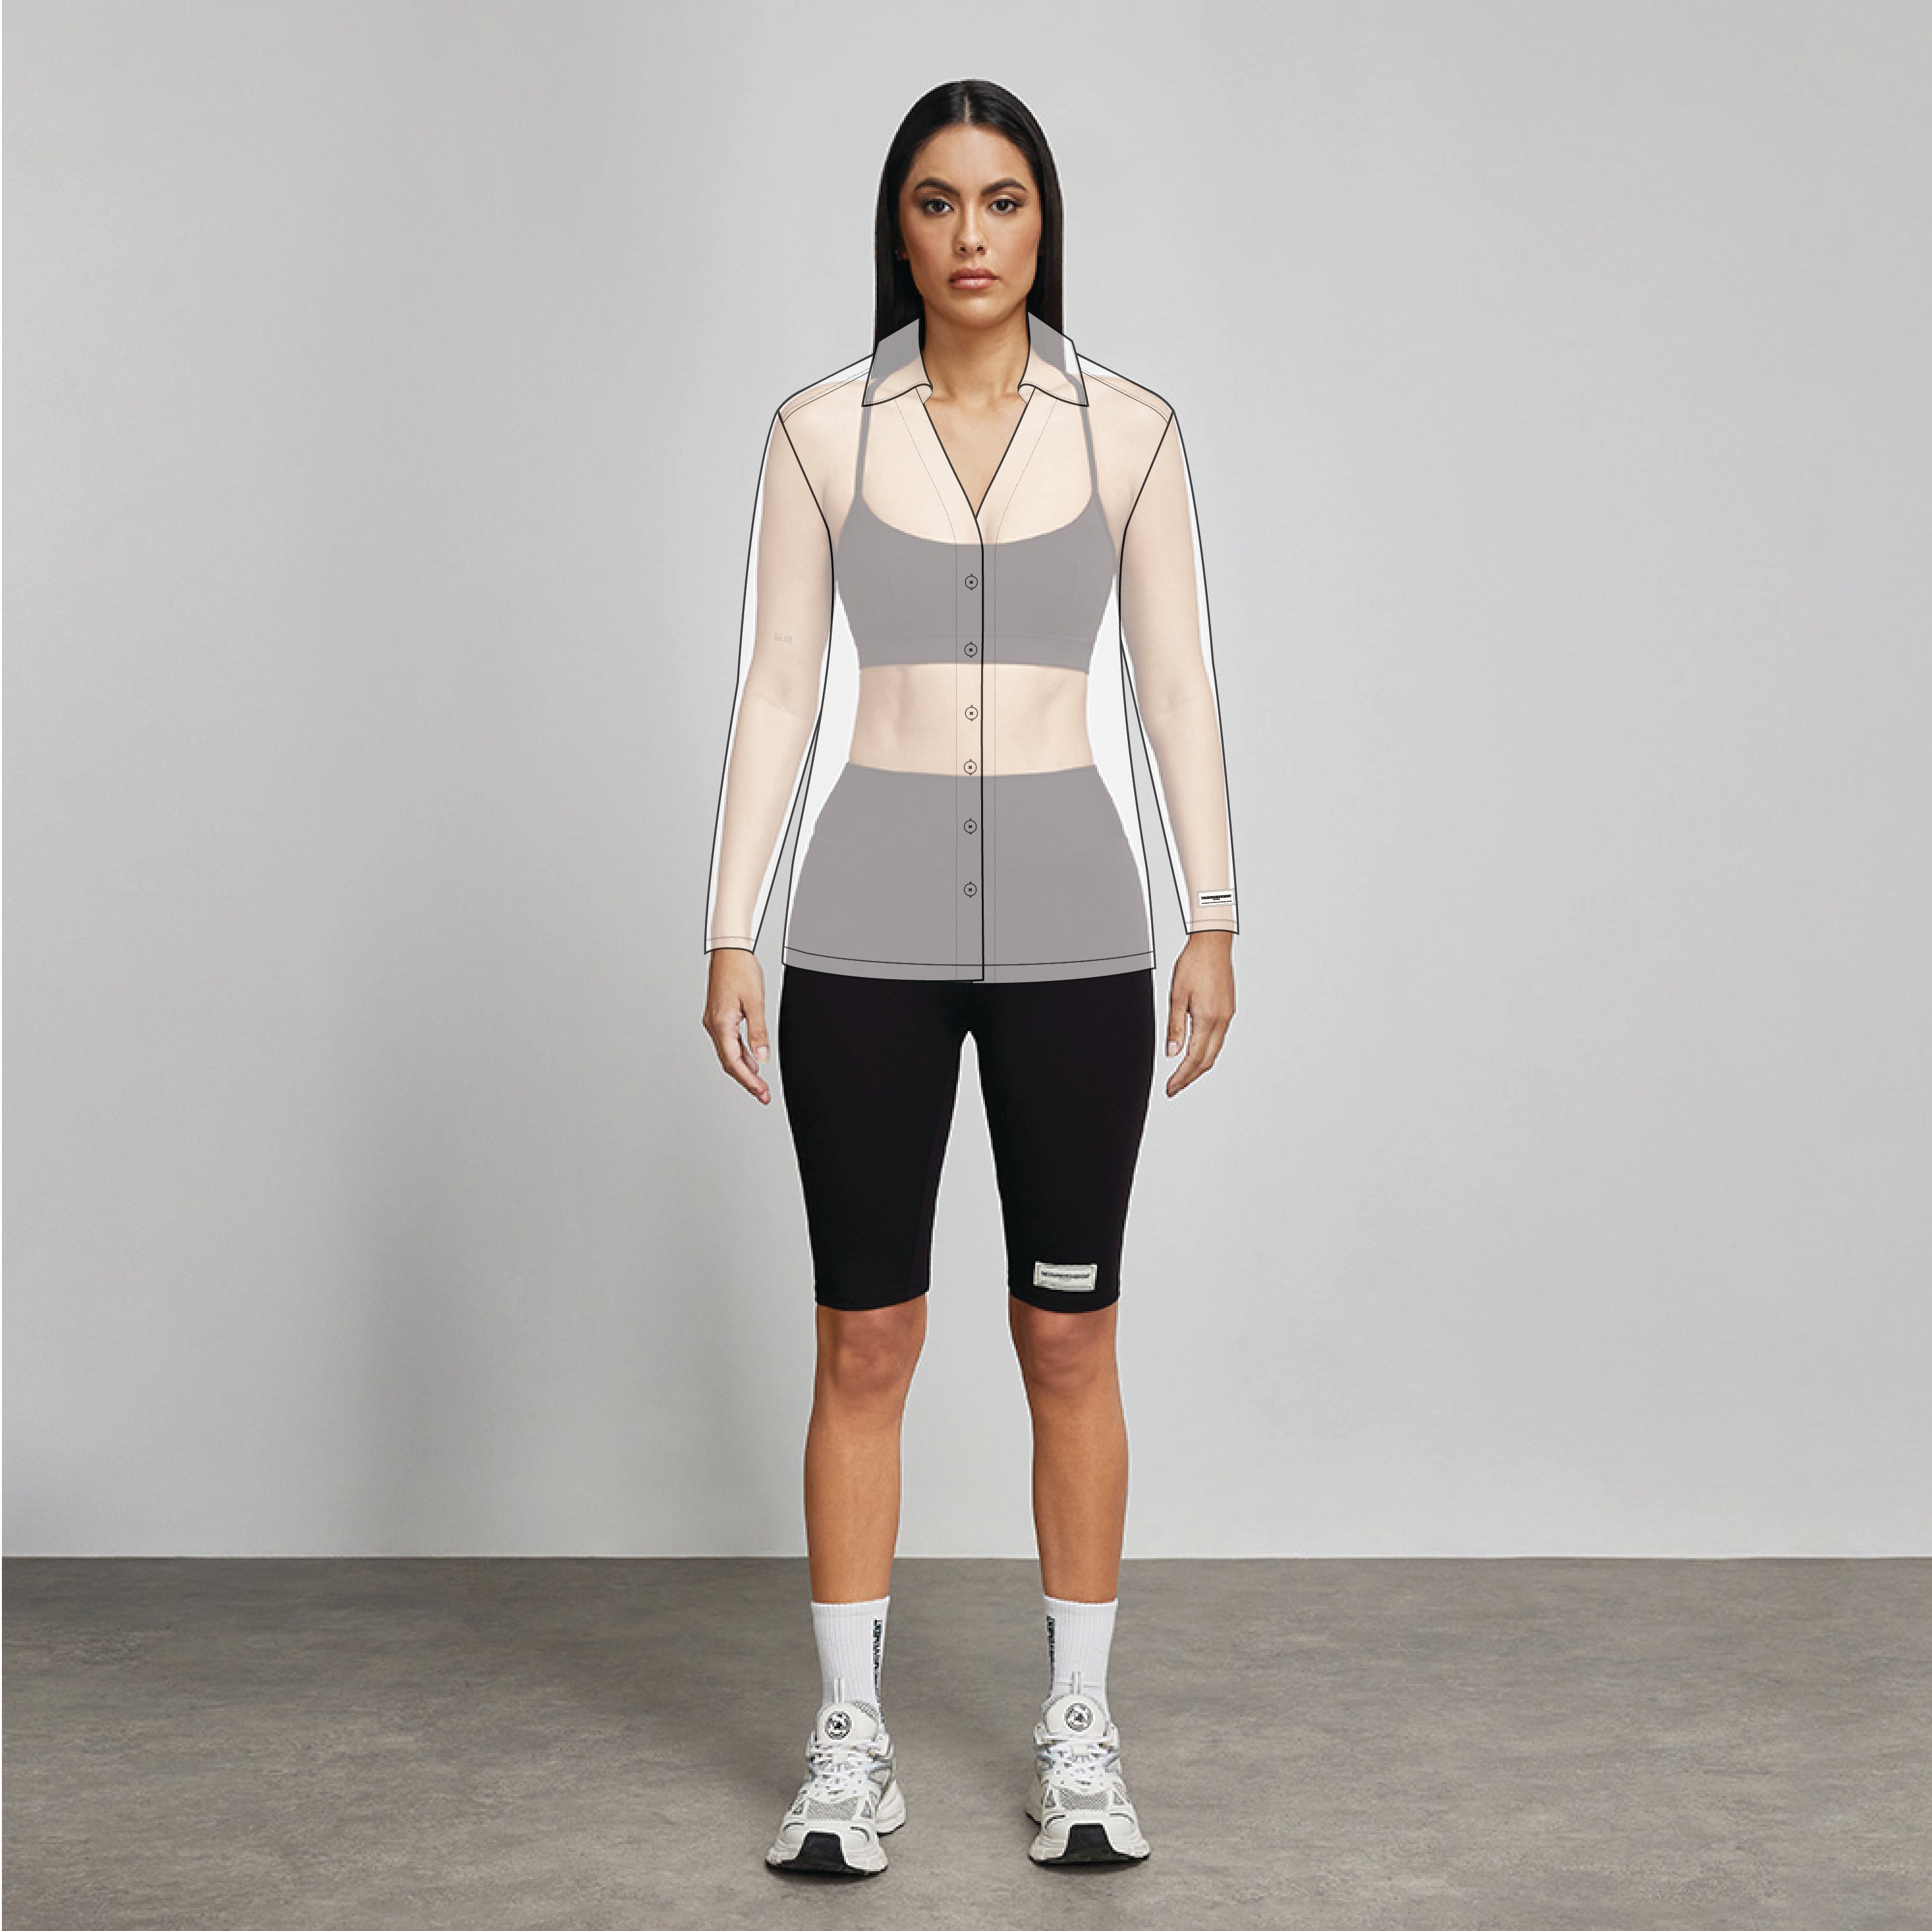 Tape Long-Sleeve Crop Giving – Streetwear The Active I Movement Top & Softskin100©